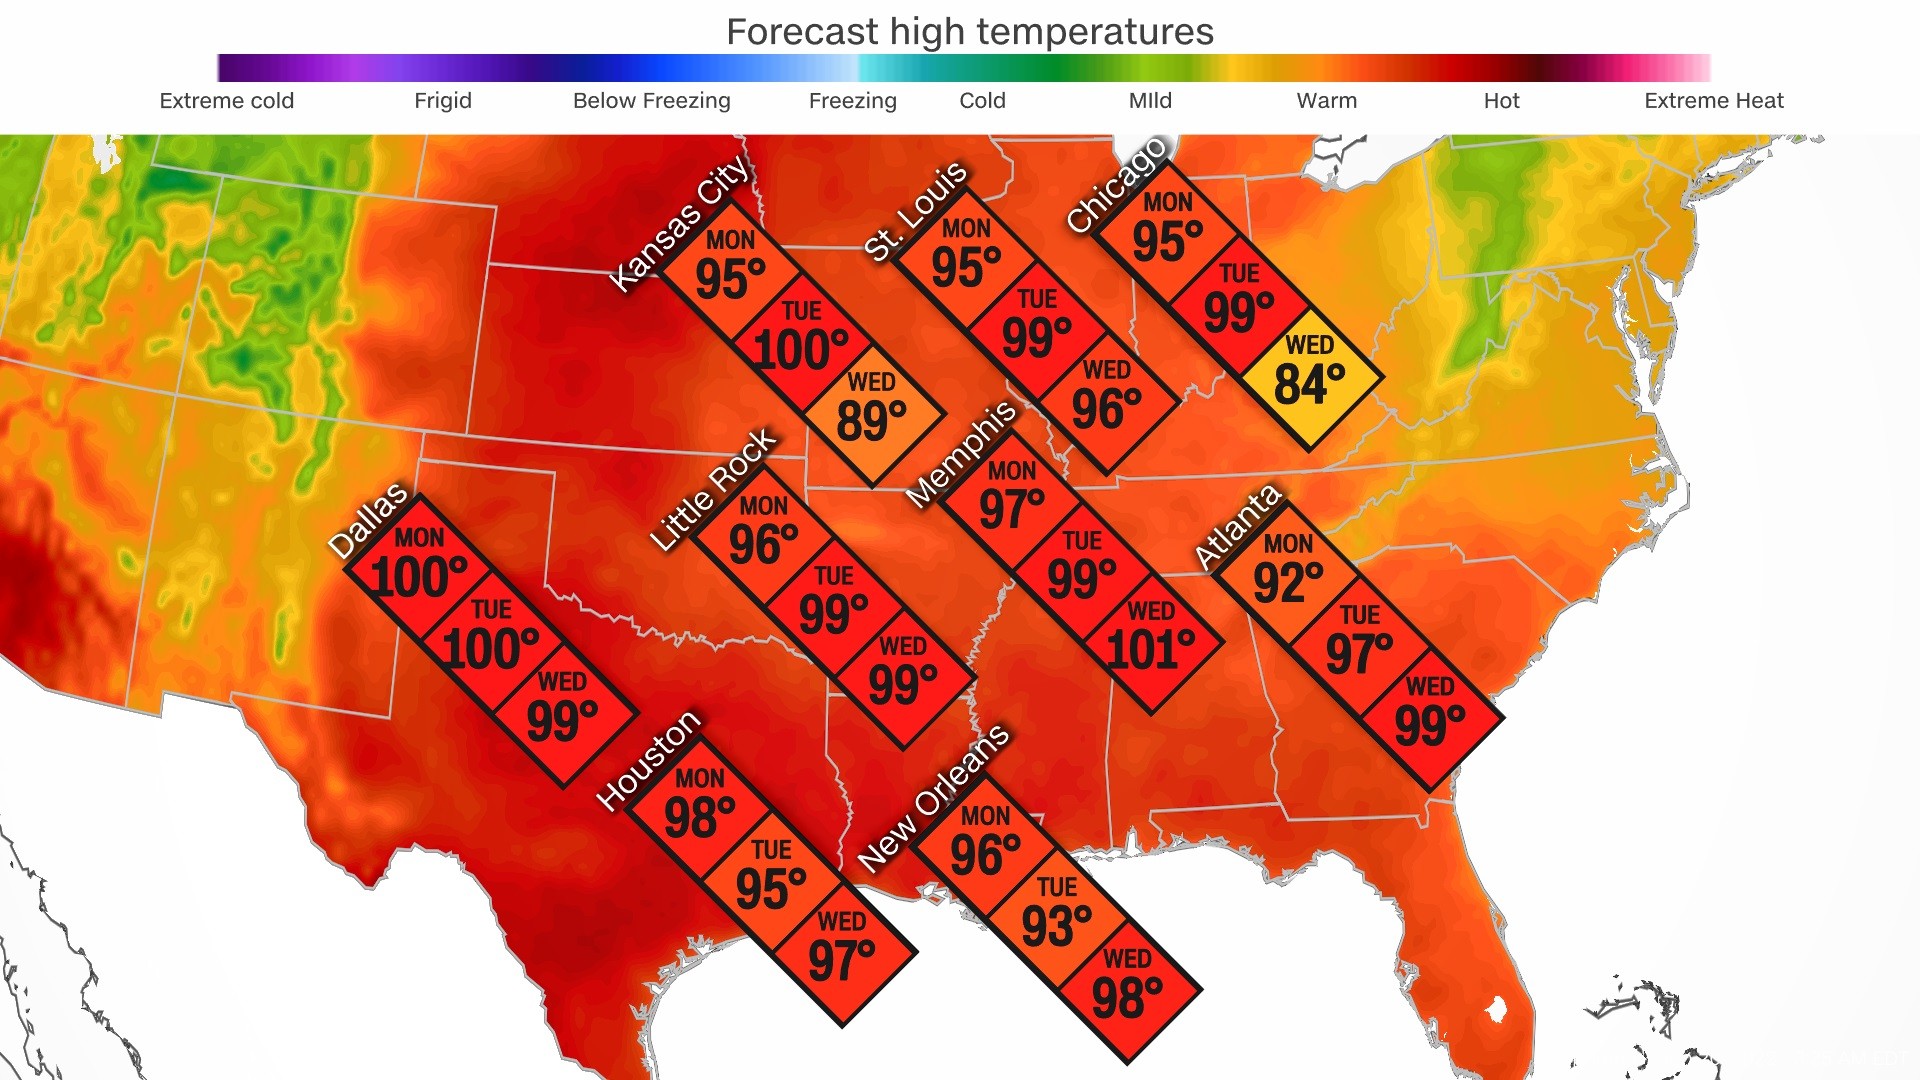 Second Heat Wave Expected to Bring Temps Above 100 for 20 of People in